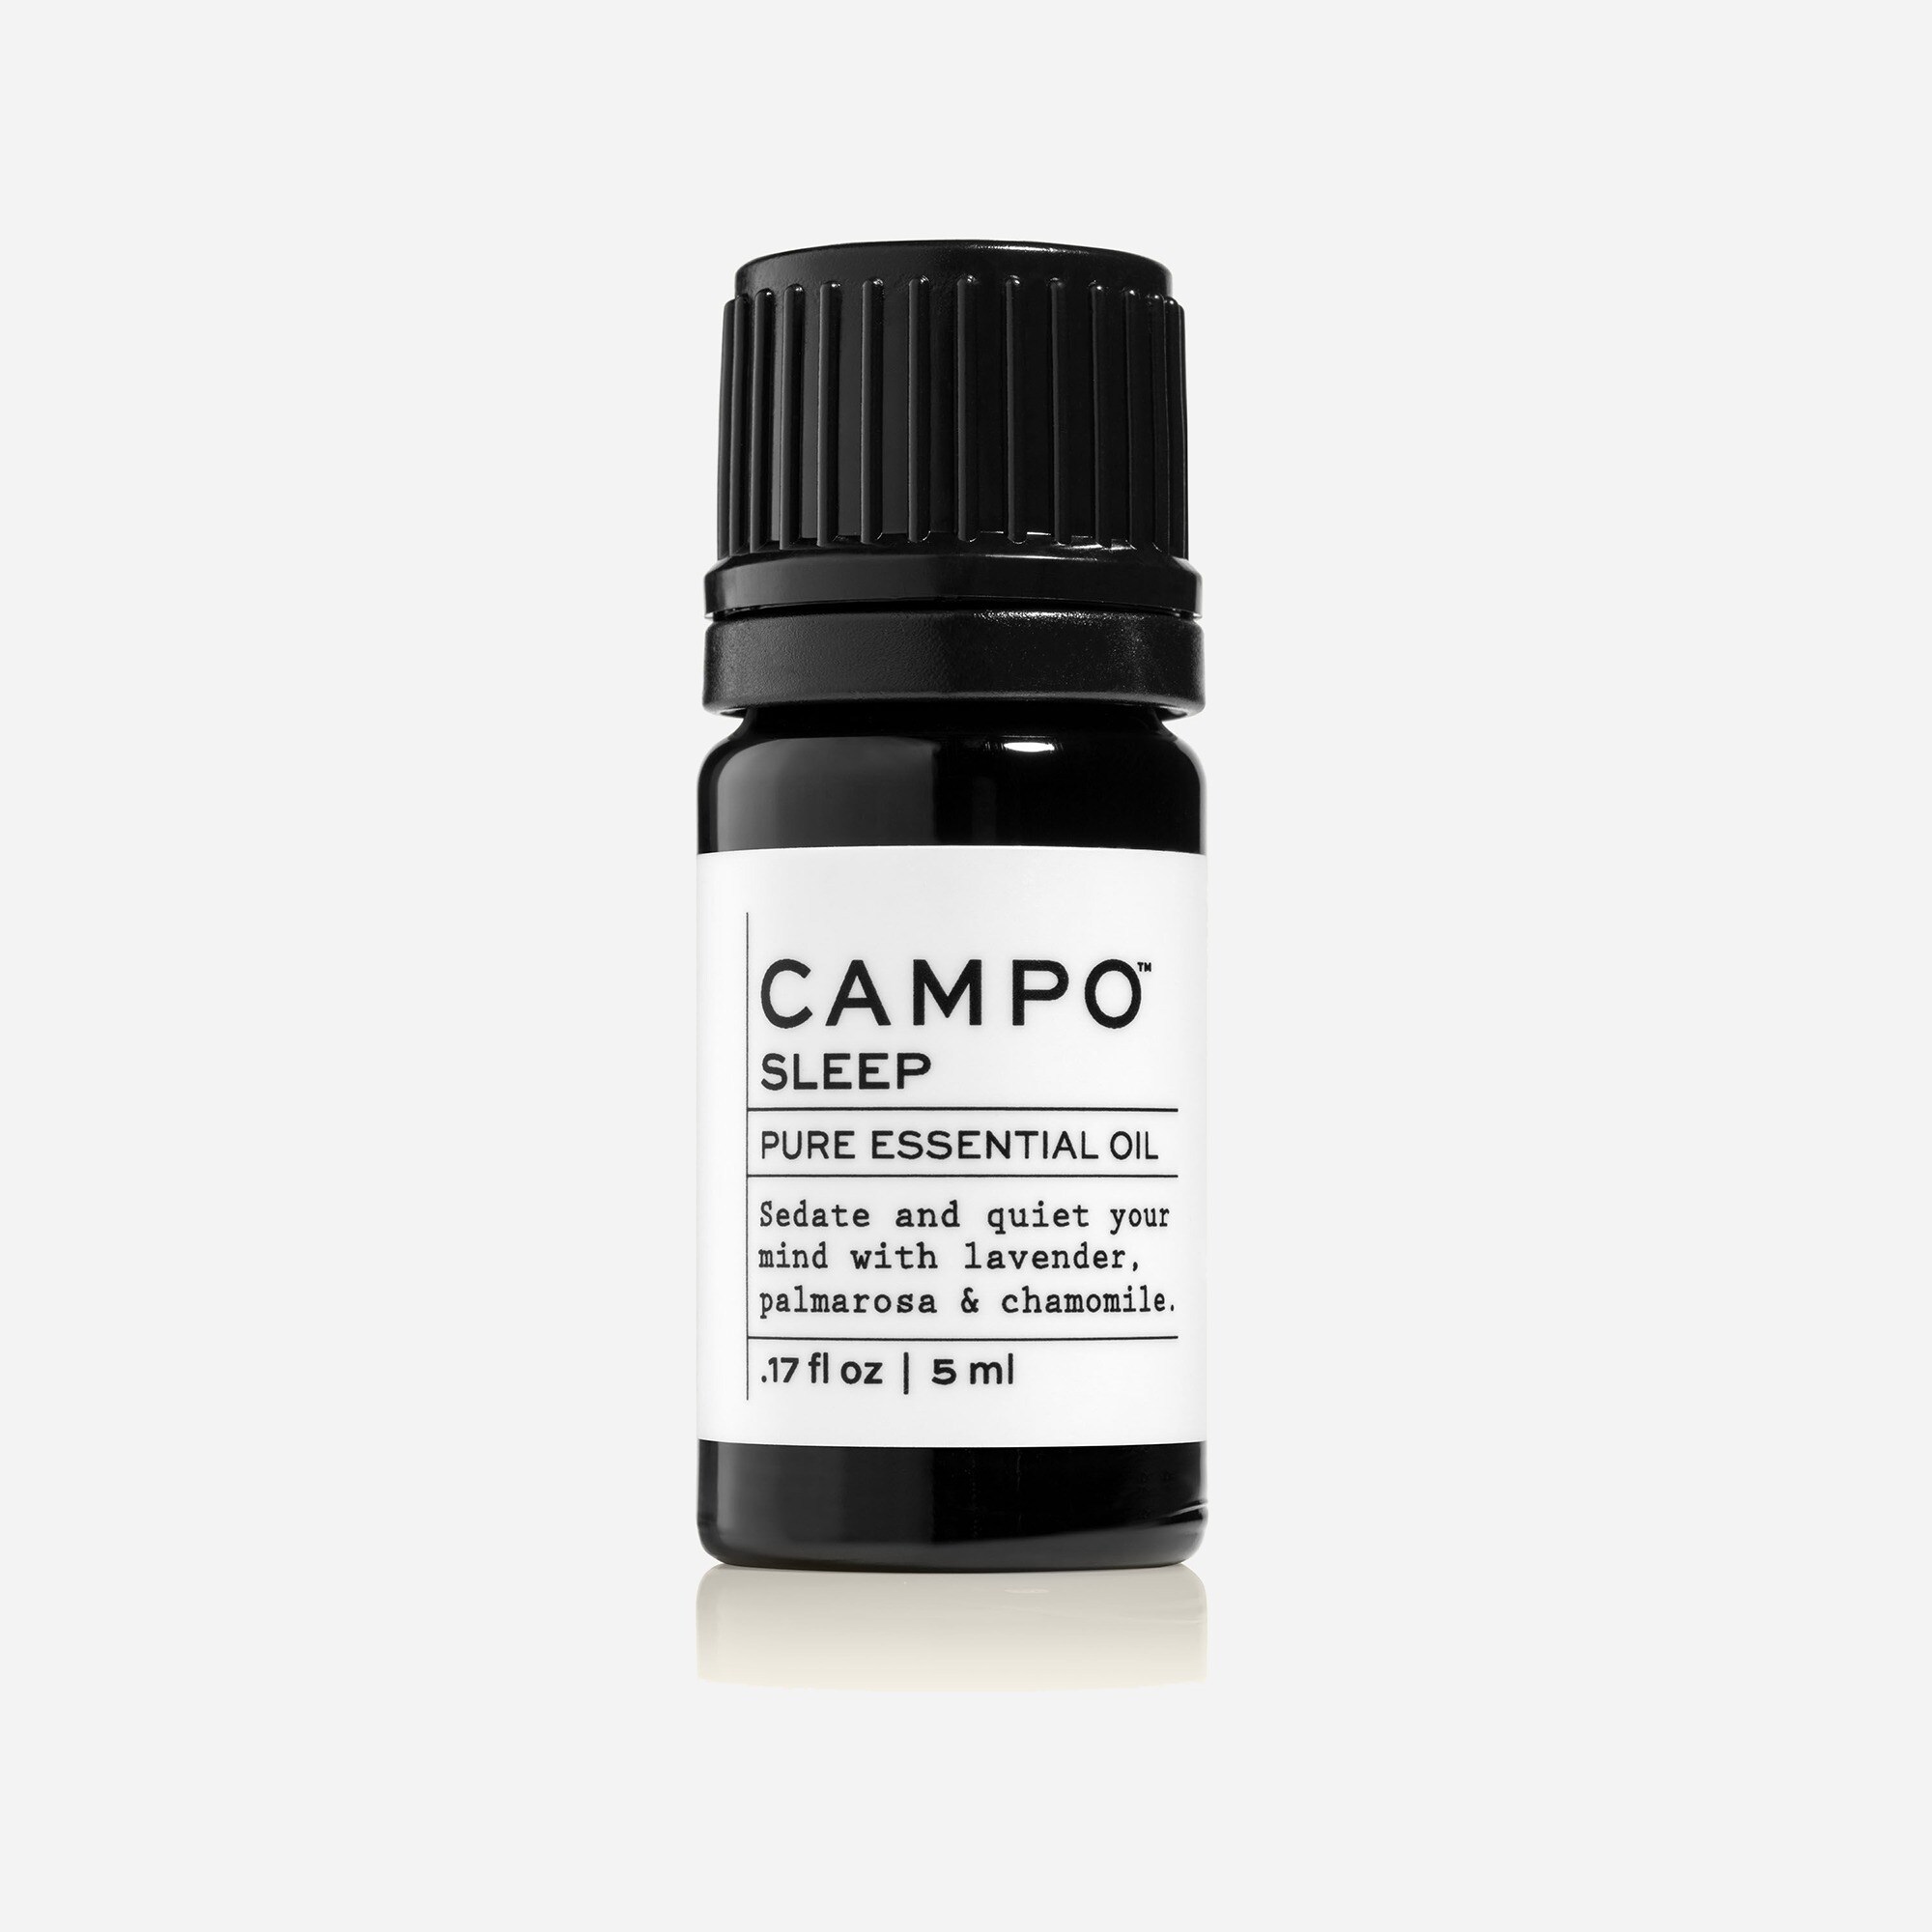  CAMPO® SLEEP BLEND pure essential oil